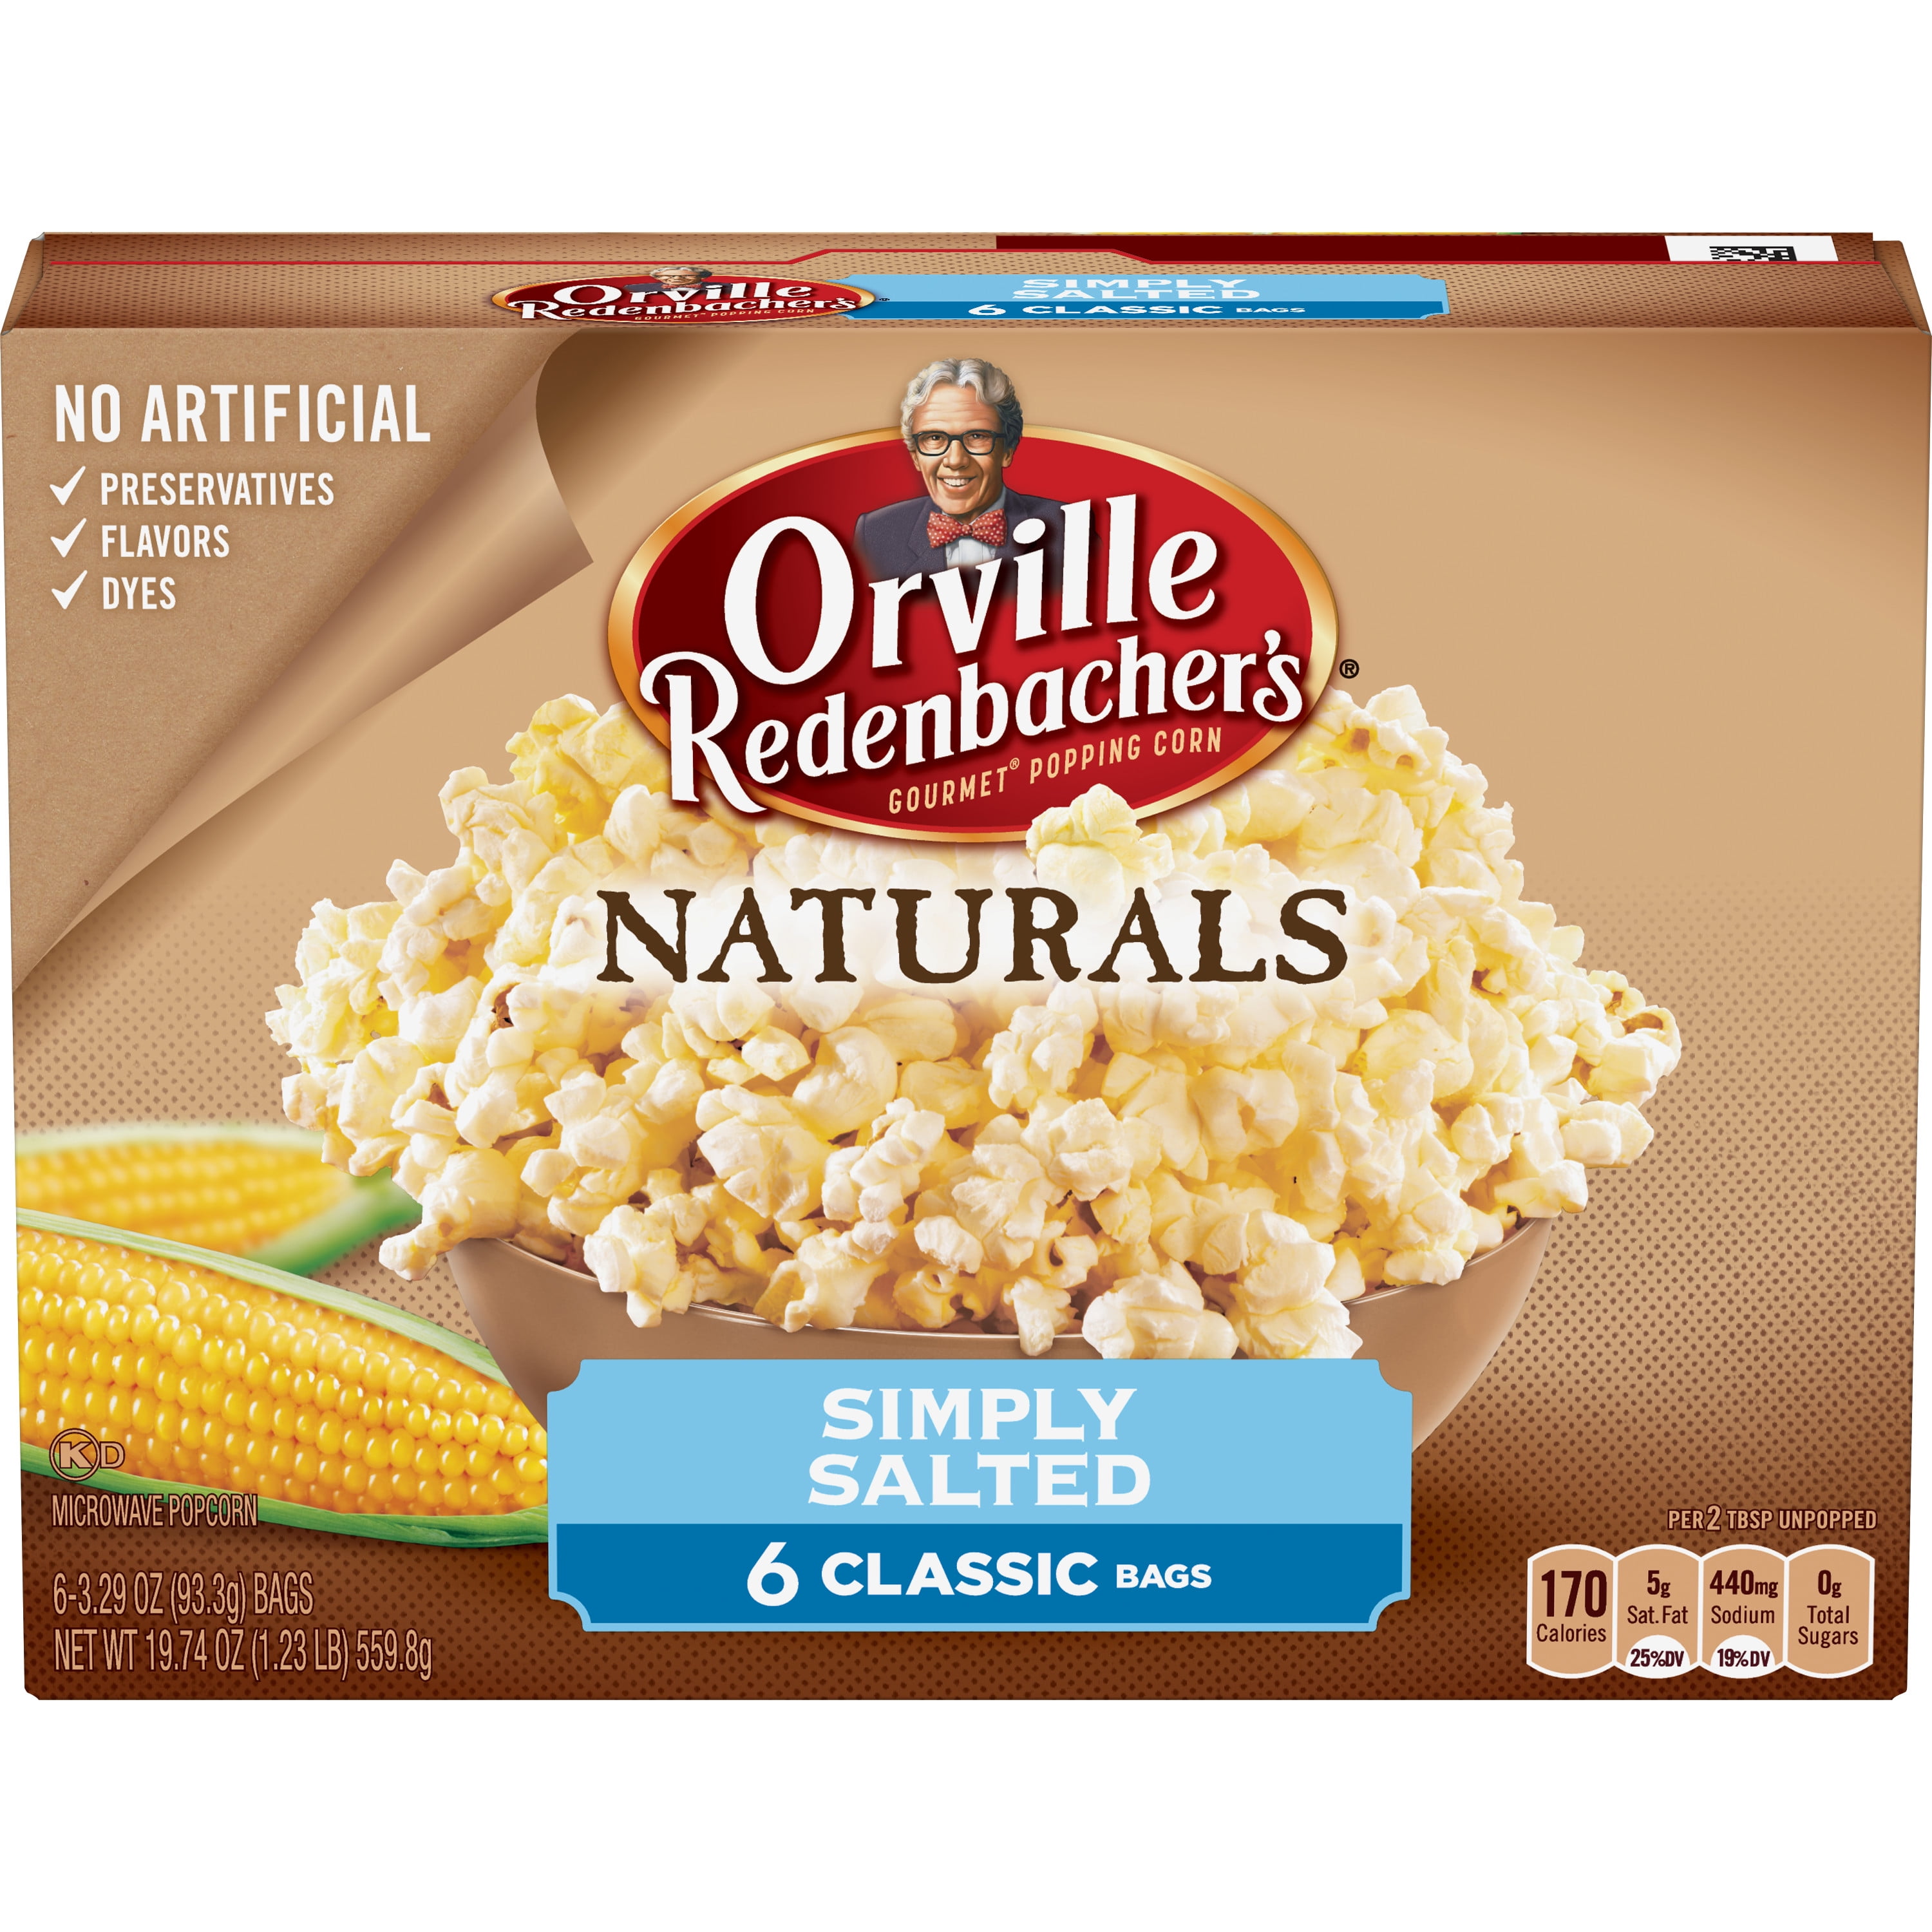 (4 Pack) Orville Redenbacher's Microwave Popcorn, Natural Simply Salted